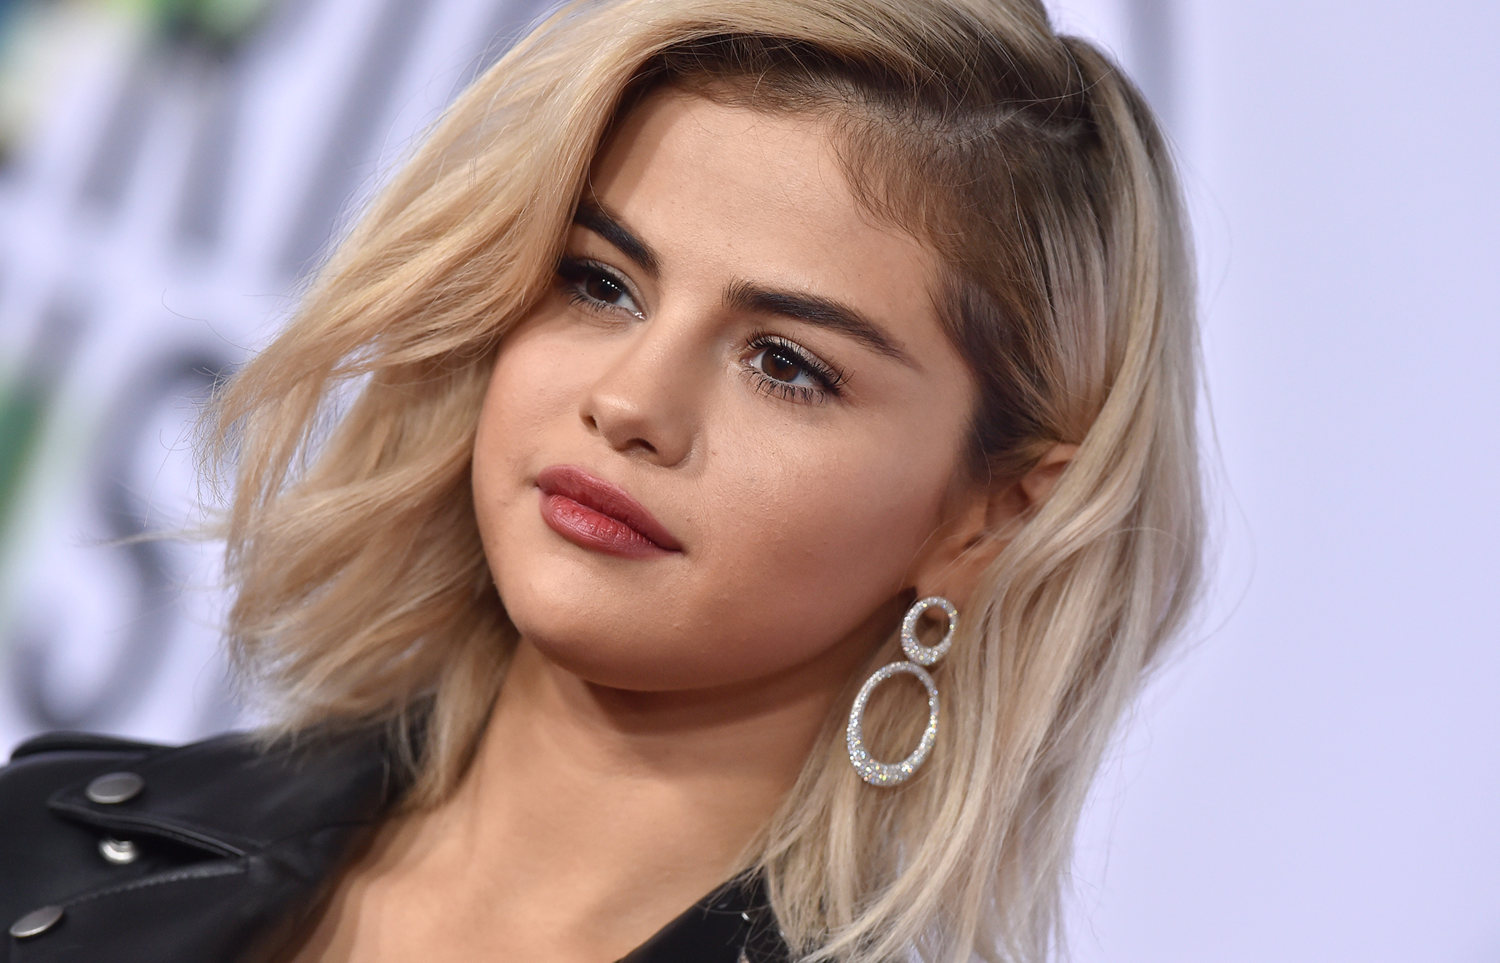 Selena Gomez Discusses Her Blonde Hair During Billboard Women in Music Red Carpet1500 x 963